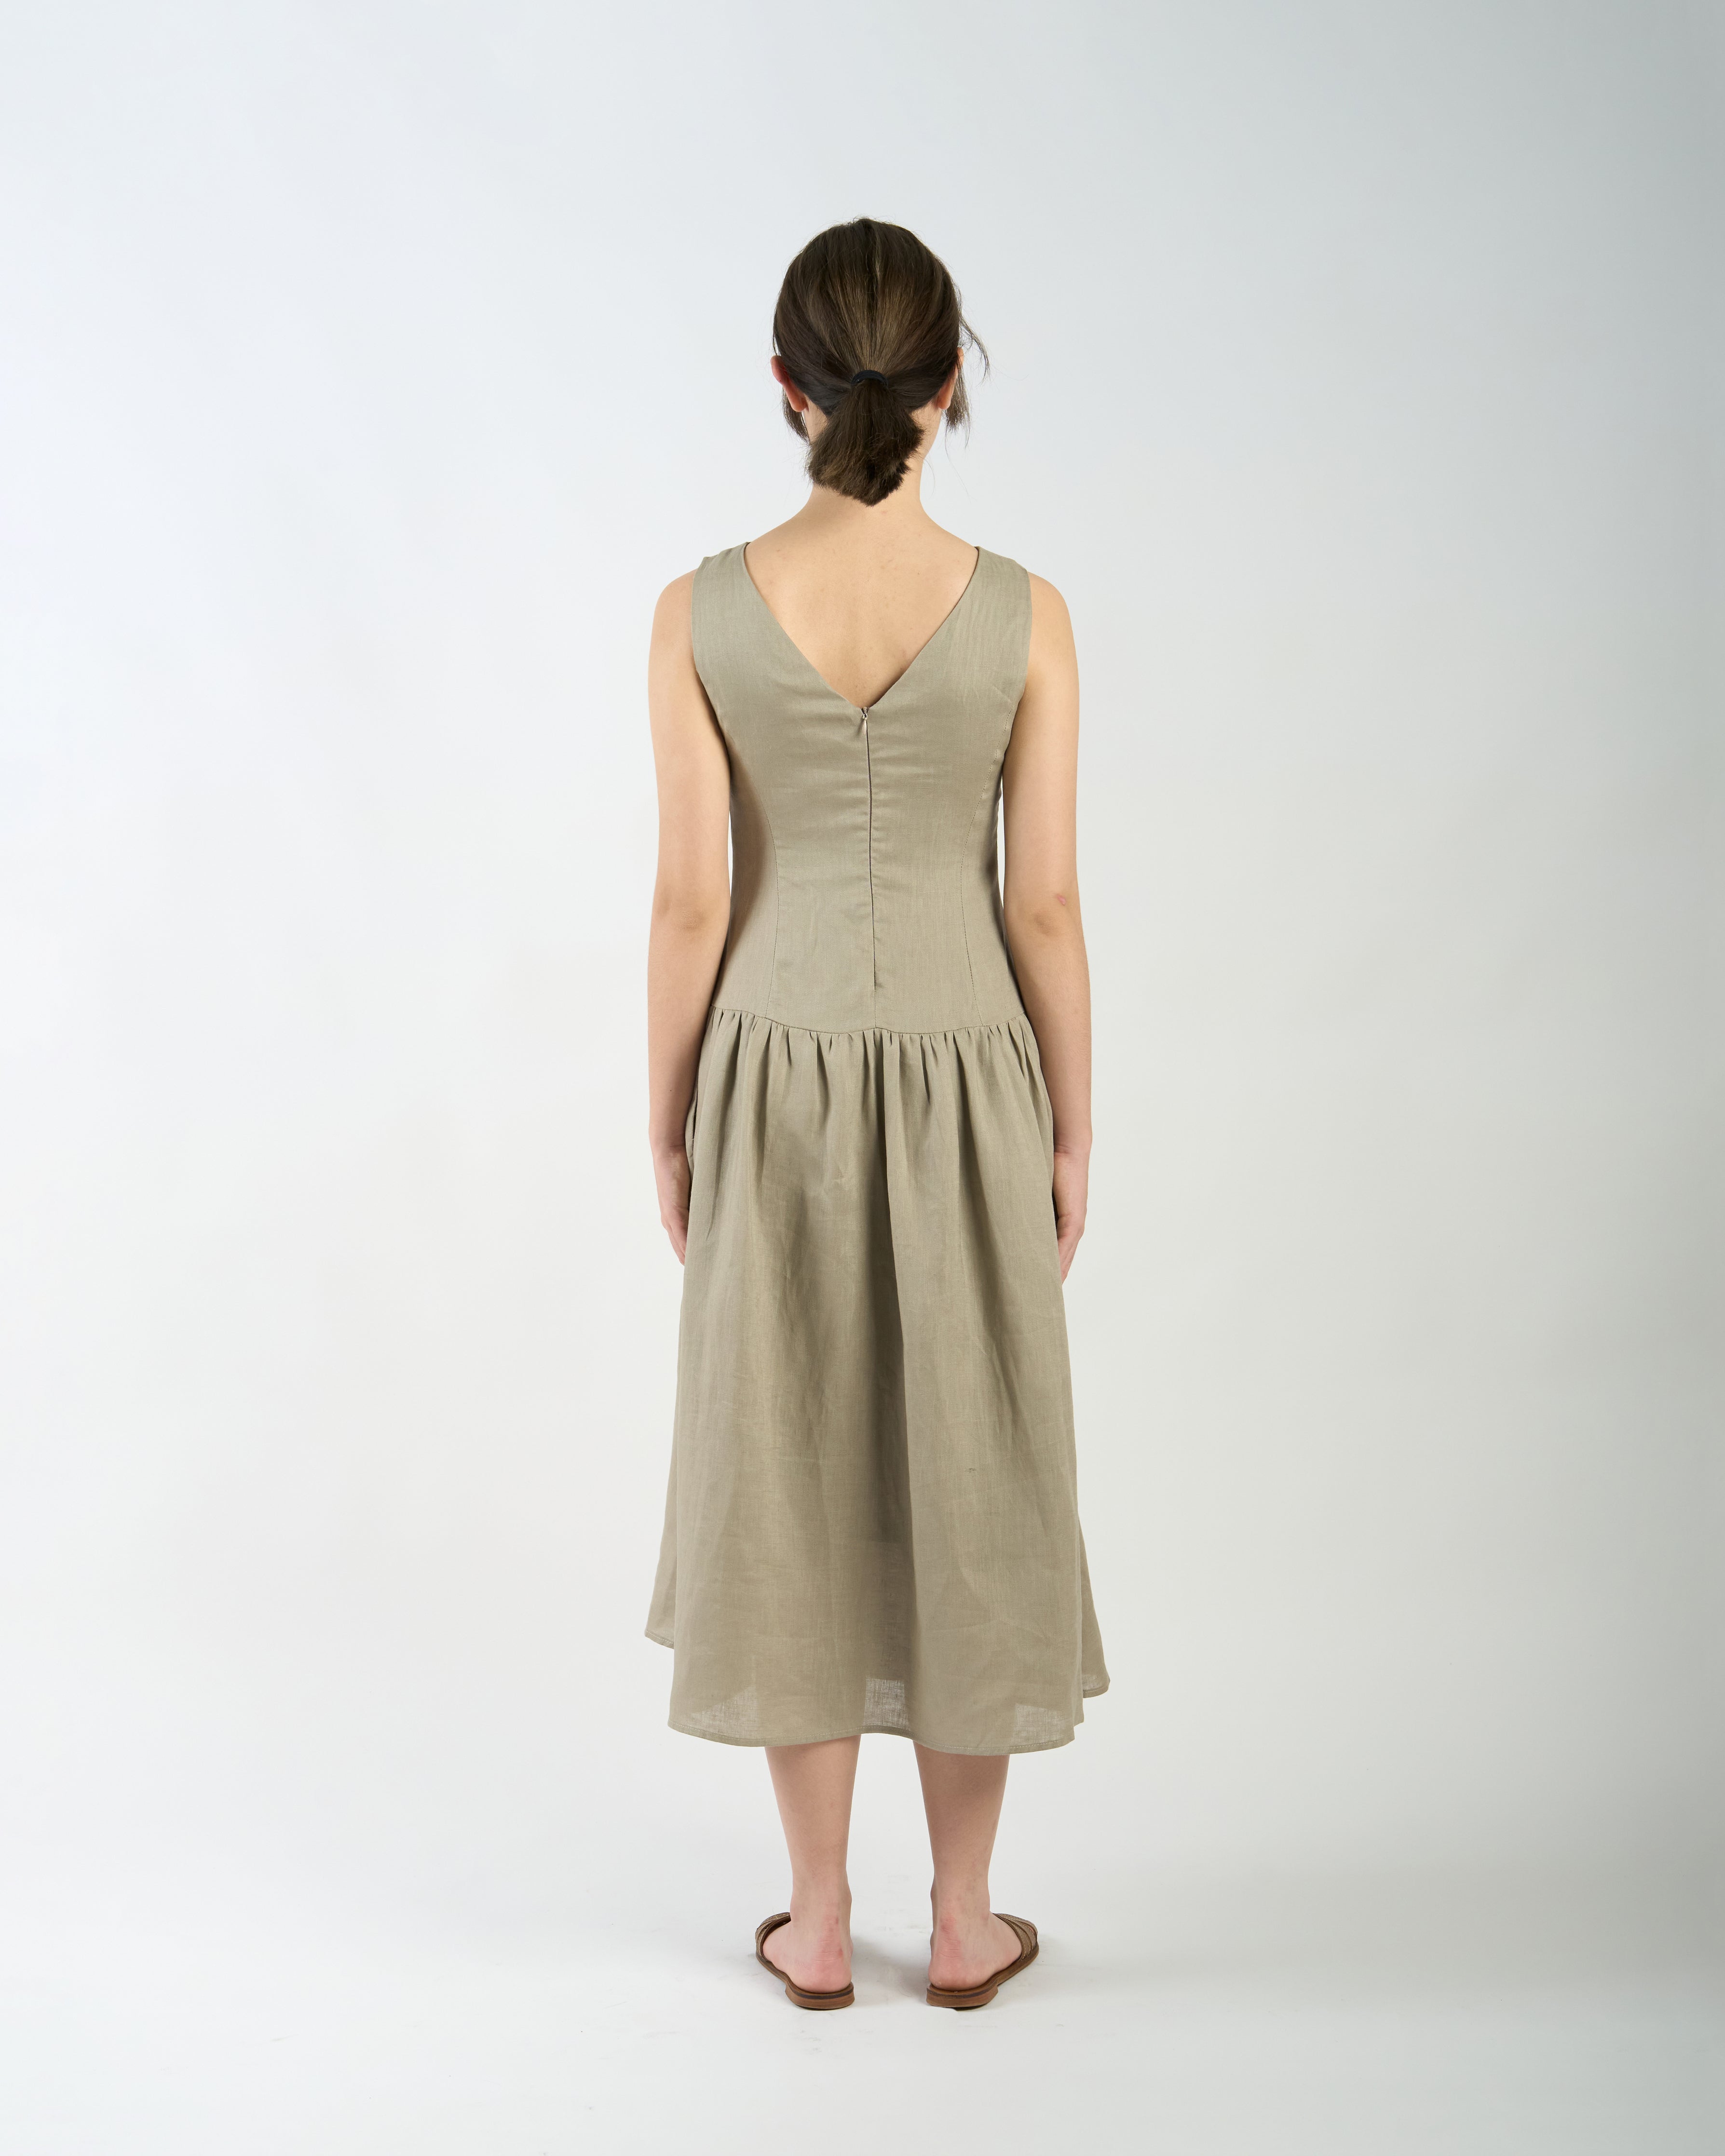 BOAT NECK GATHERED DRESS in taupe